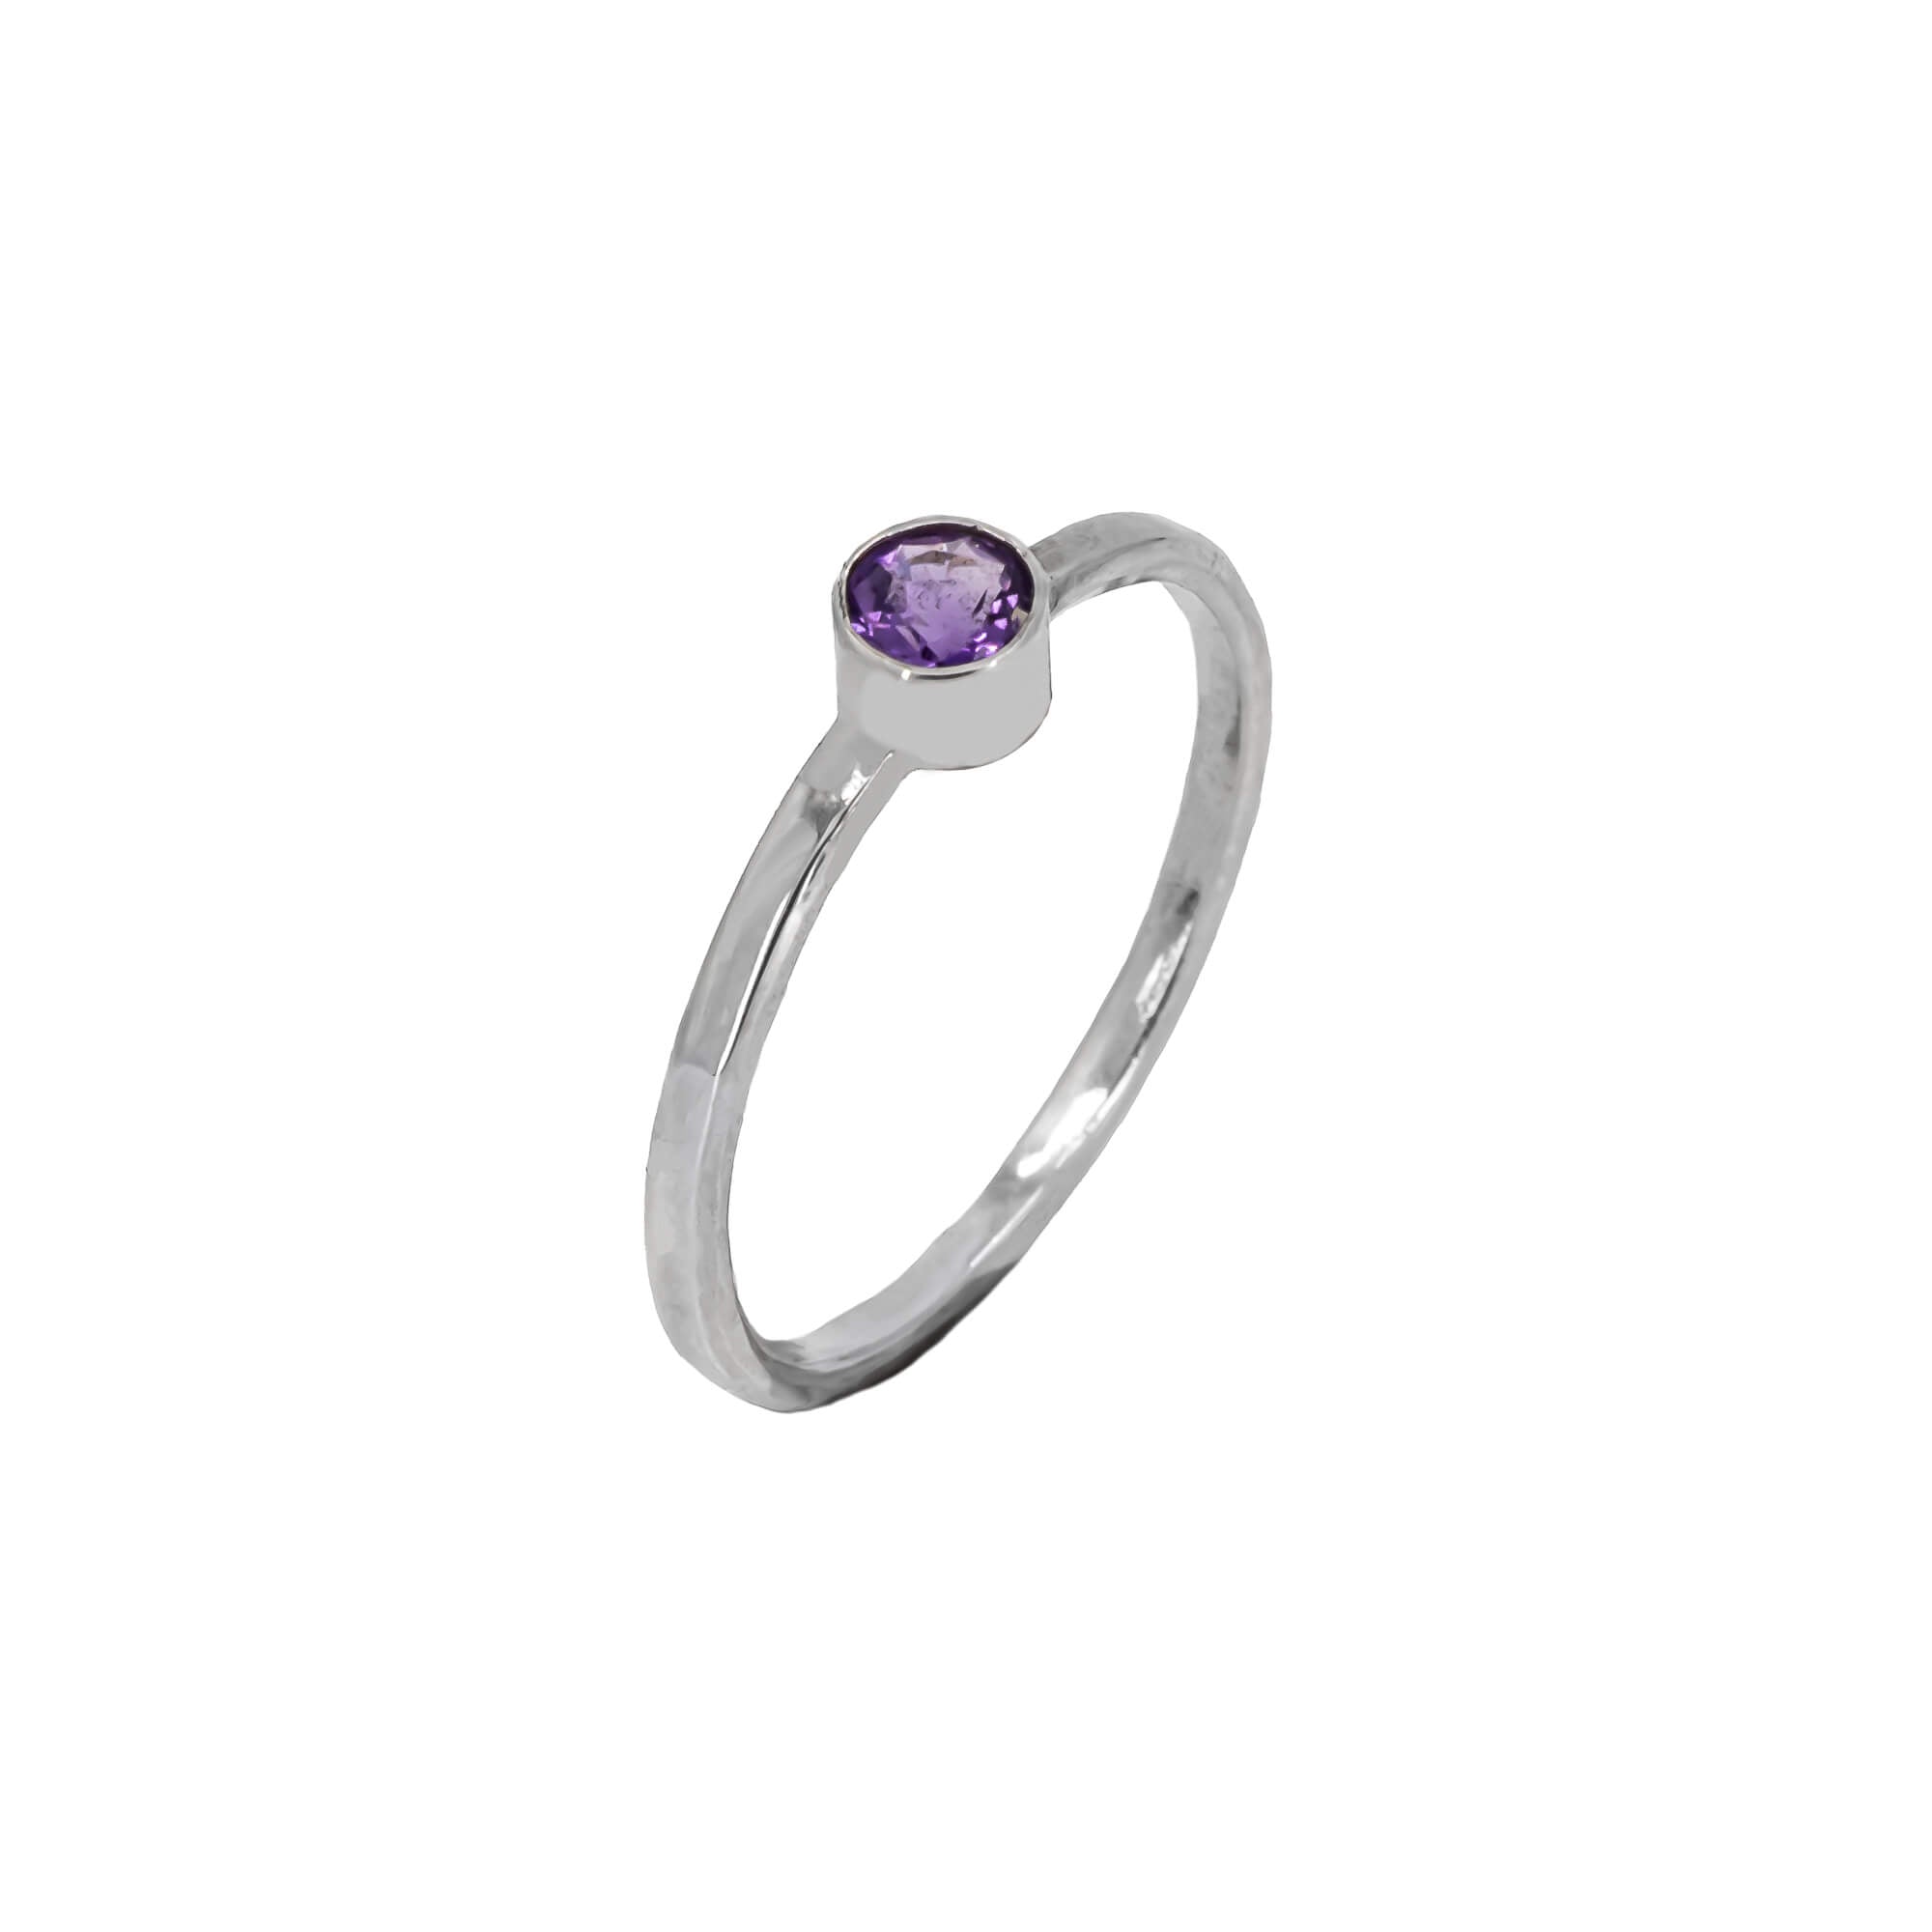 Faceted Amethyst stackable ring in sterling silver with a textured band